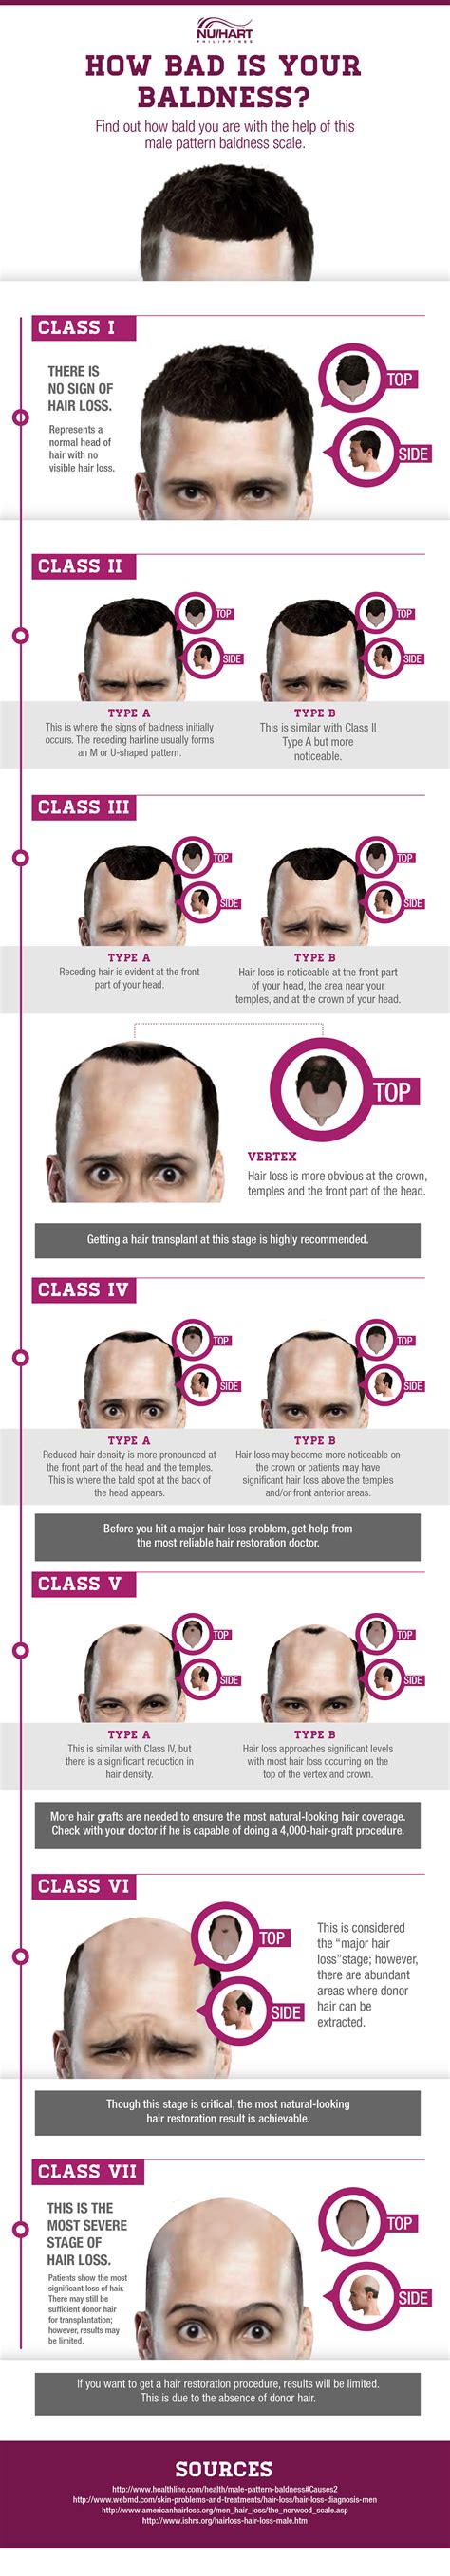 The different stages of hair loss can be categorized into the either the norwood or savin scale stage 3 is where we first start to see the signs of clinically significant hair loss and balding. Stages of Male Pattern Baldness Infographic